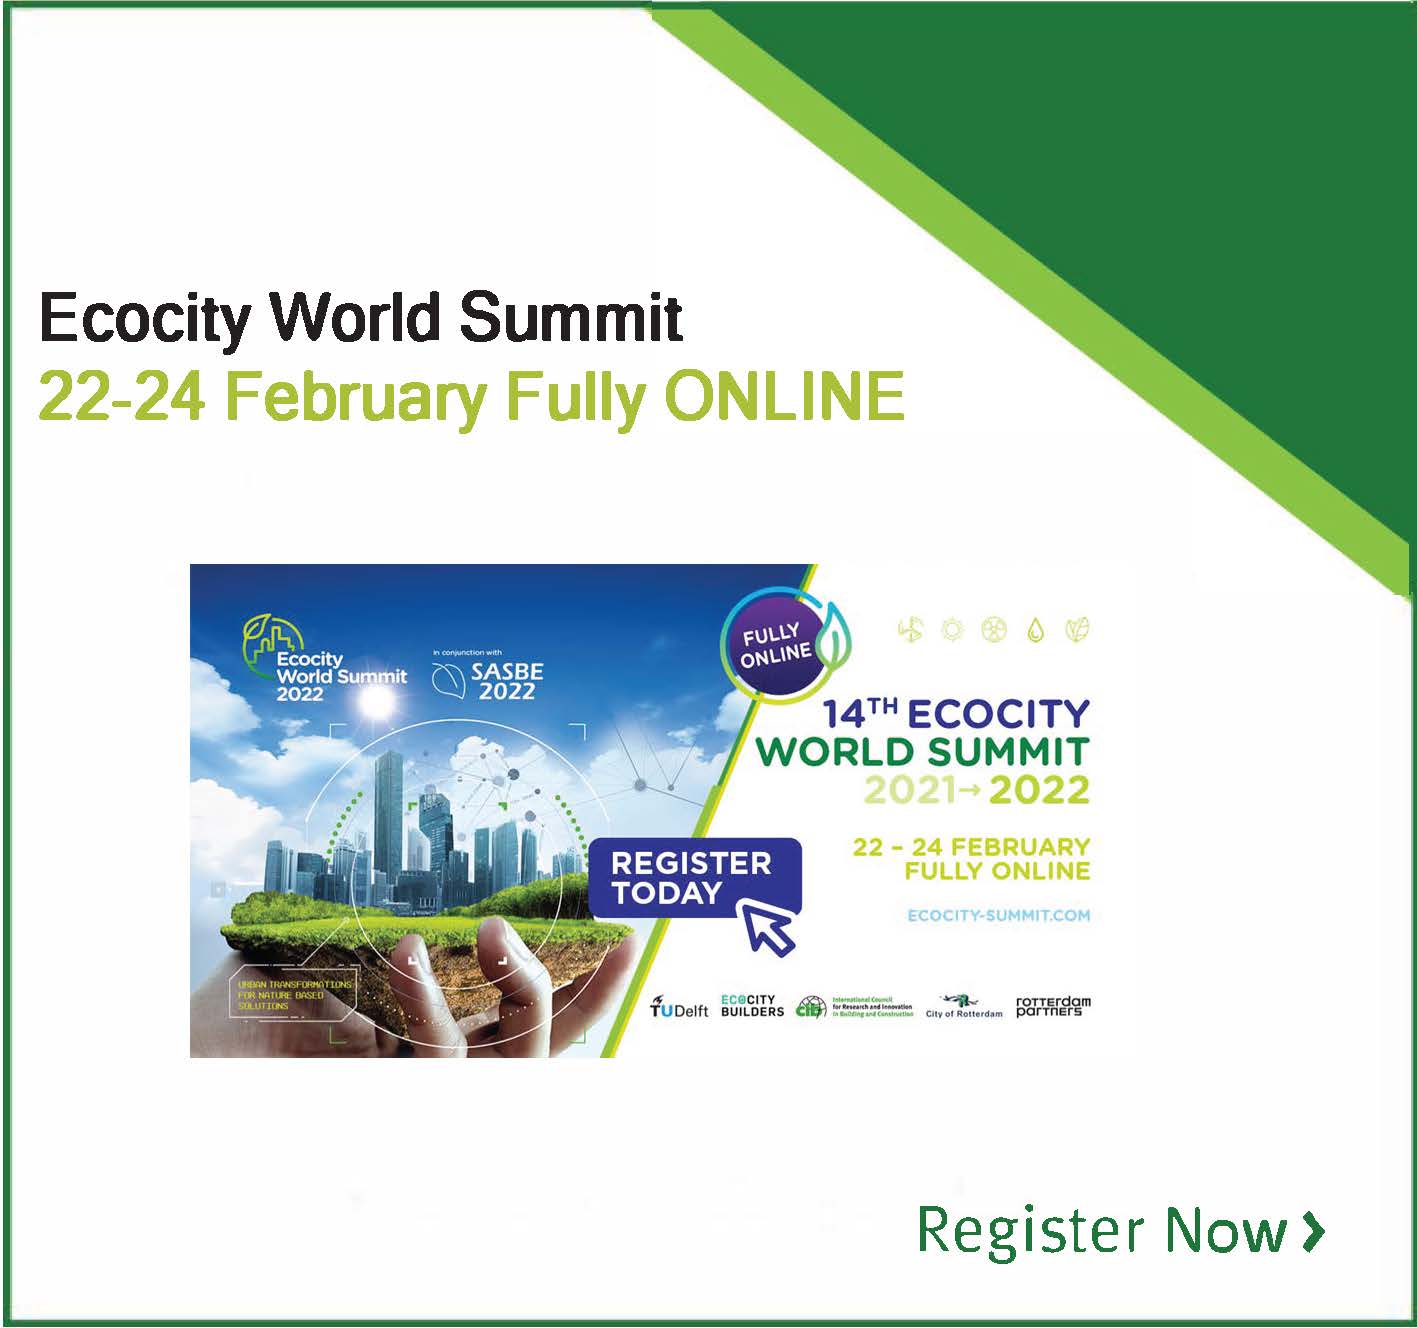 Join us for the 14th edition of Ecocity World Summit! CIB